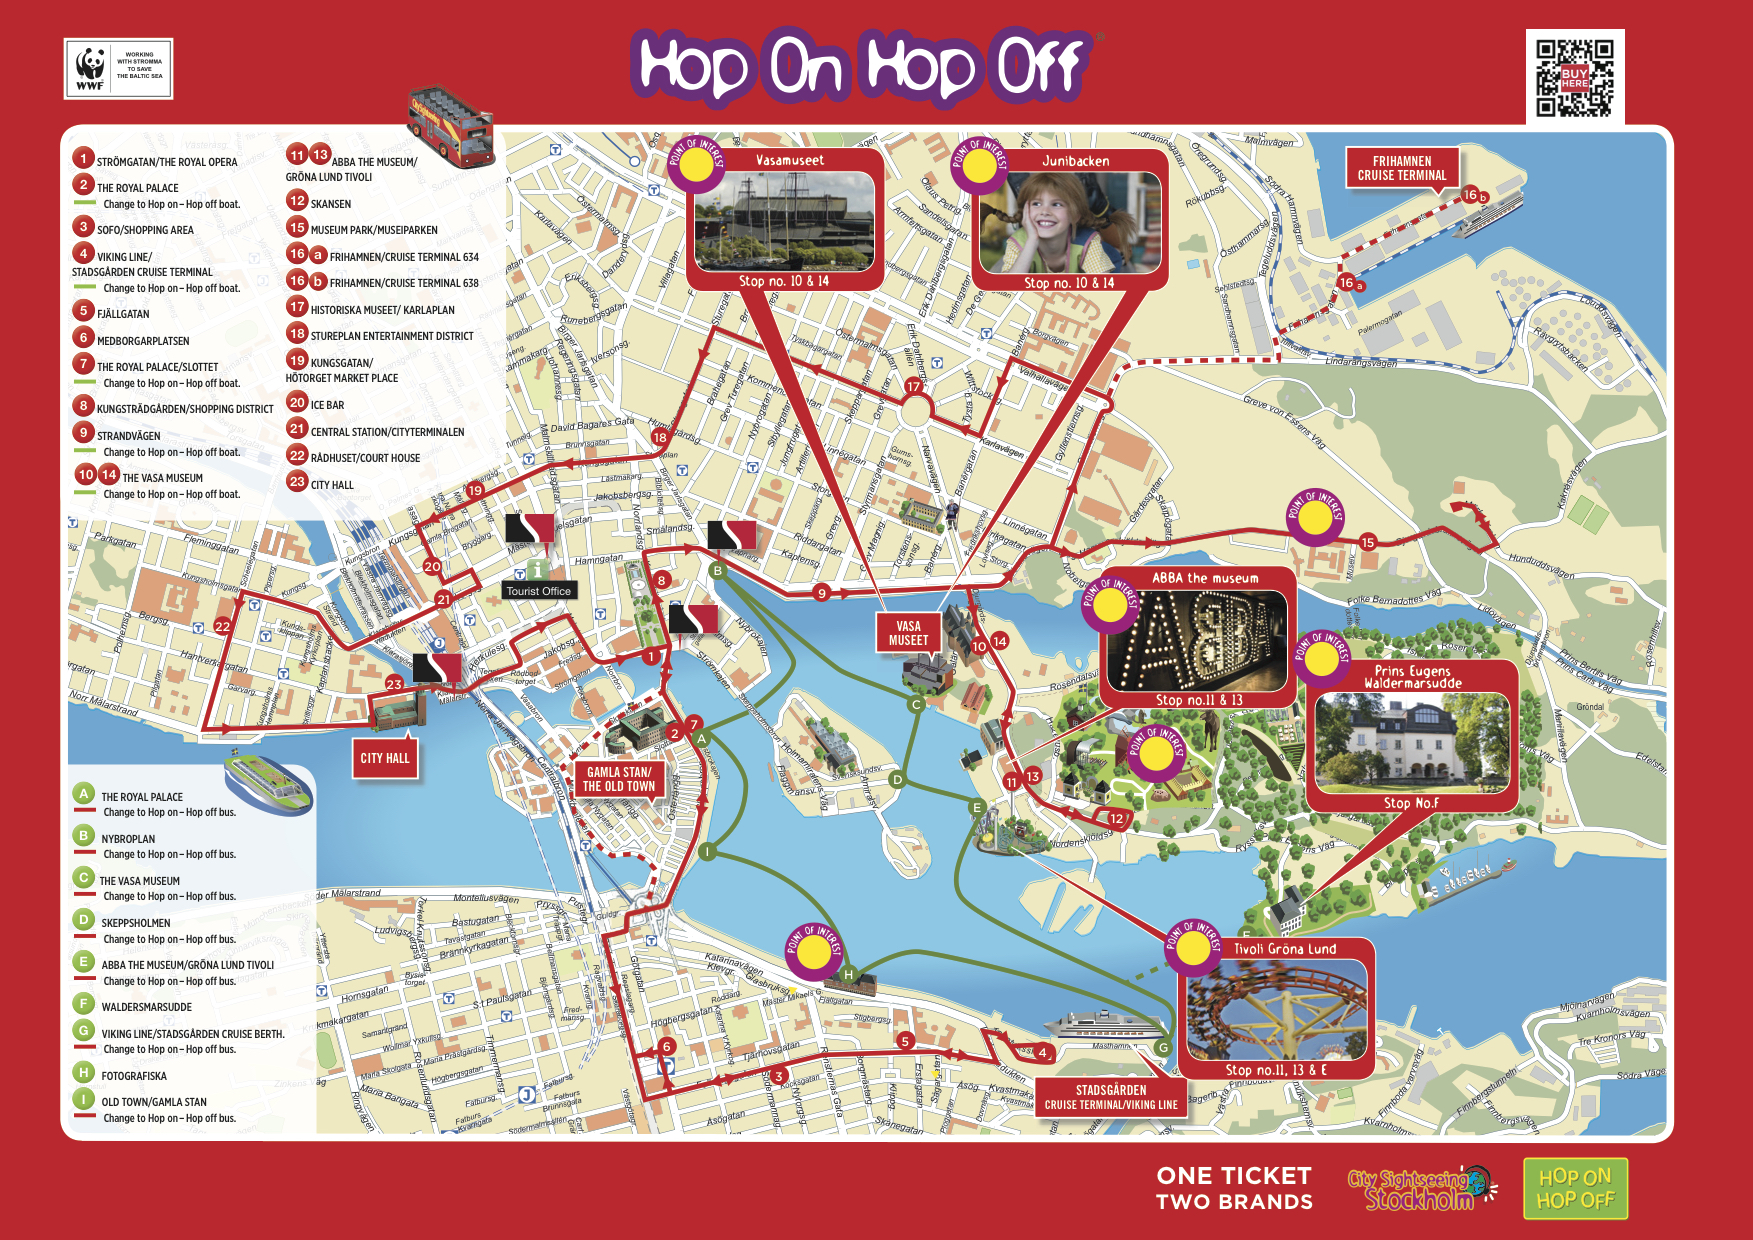 Stockholm Hop On Hop Off Bus Map Small 